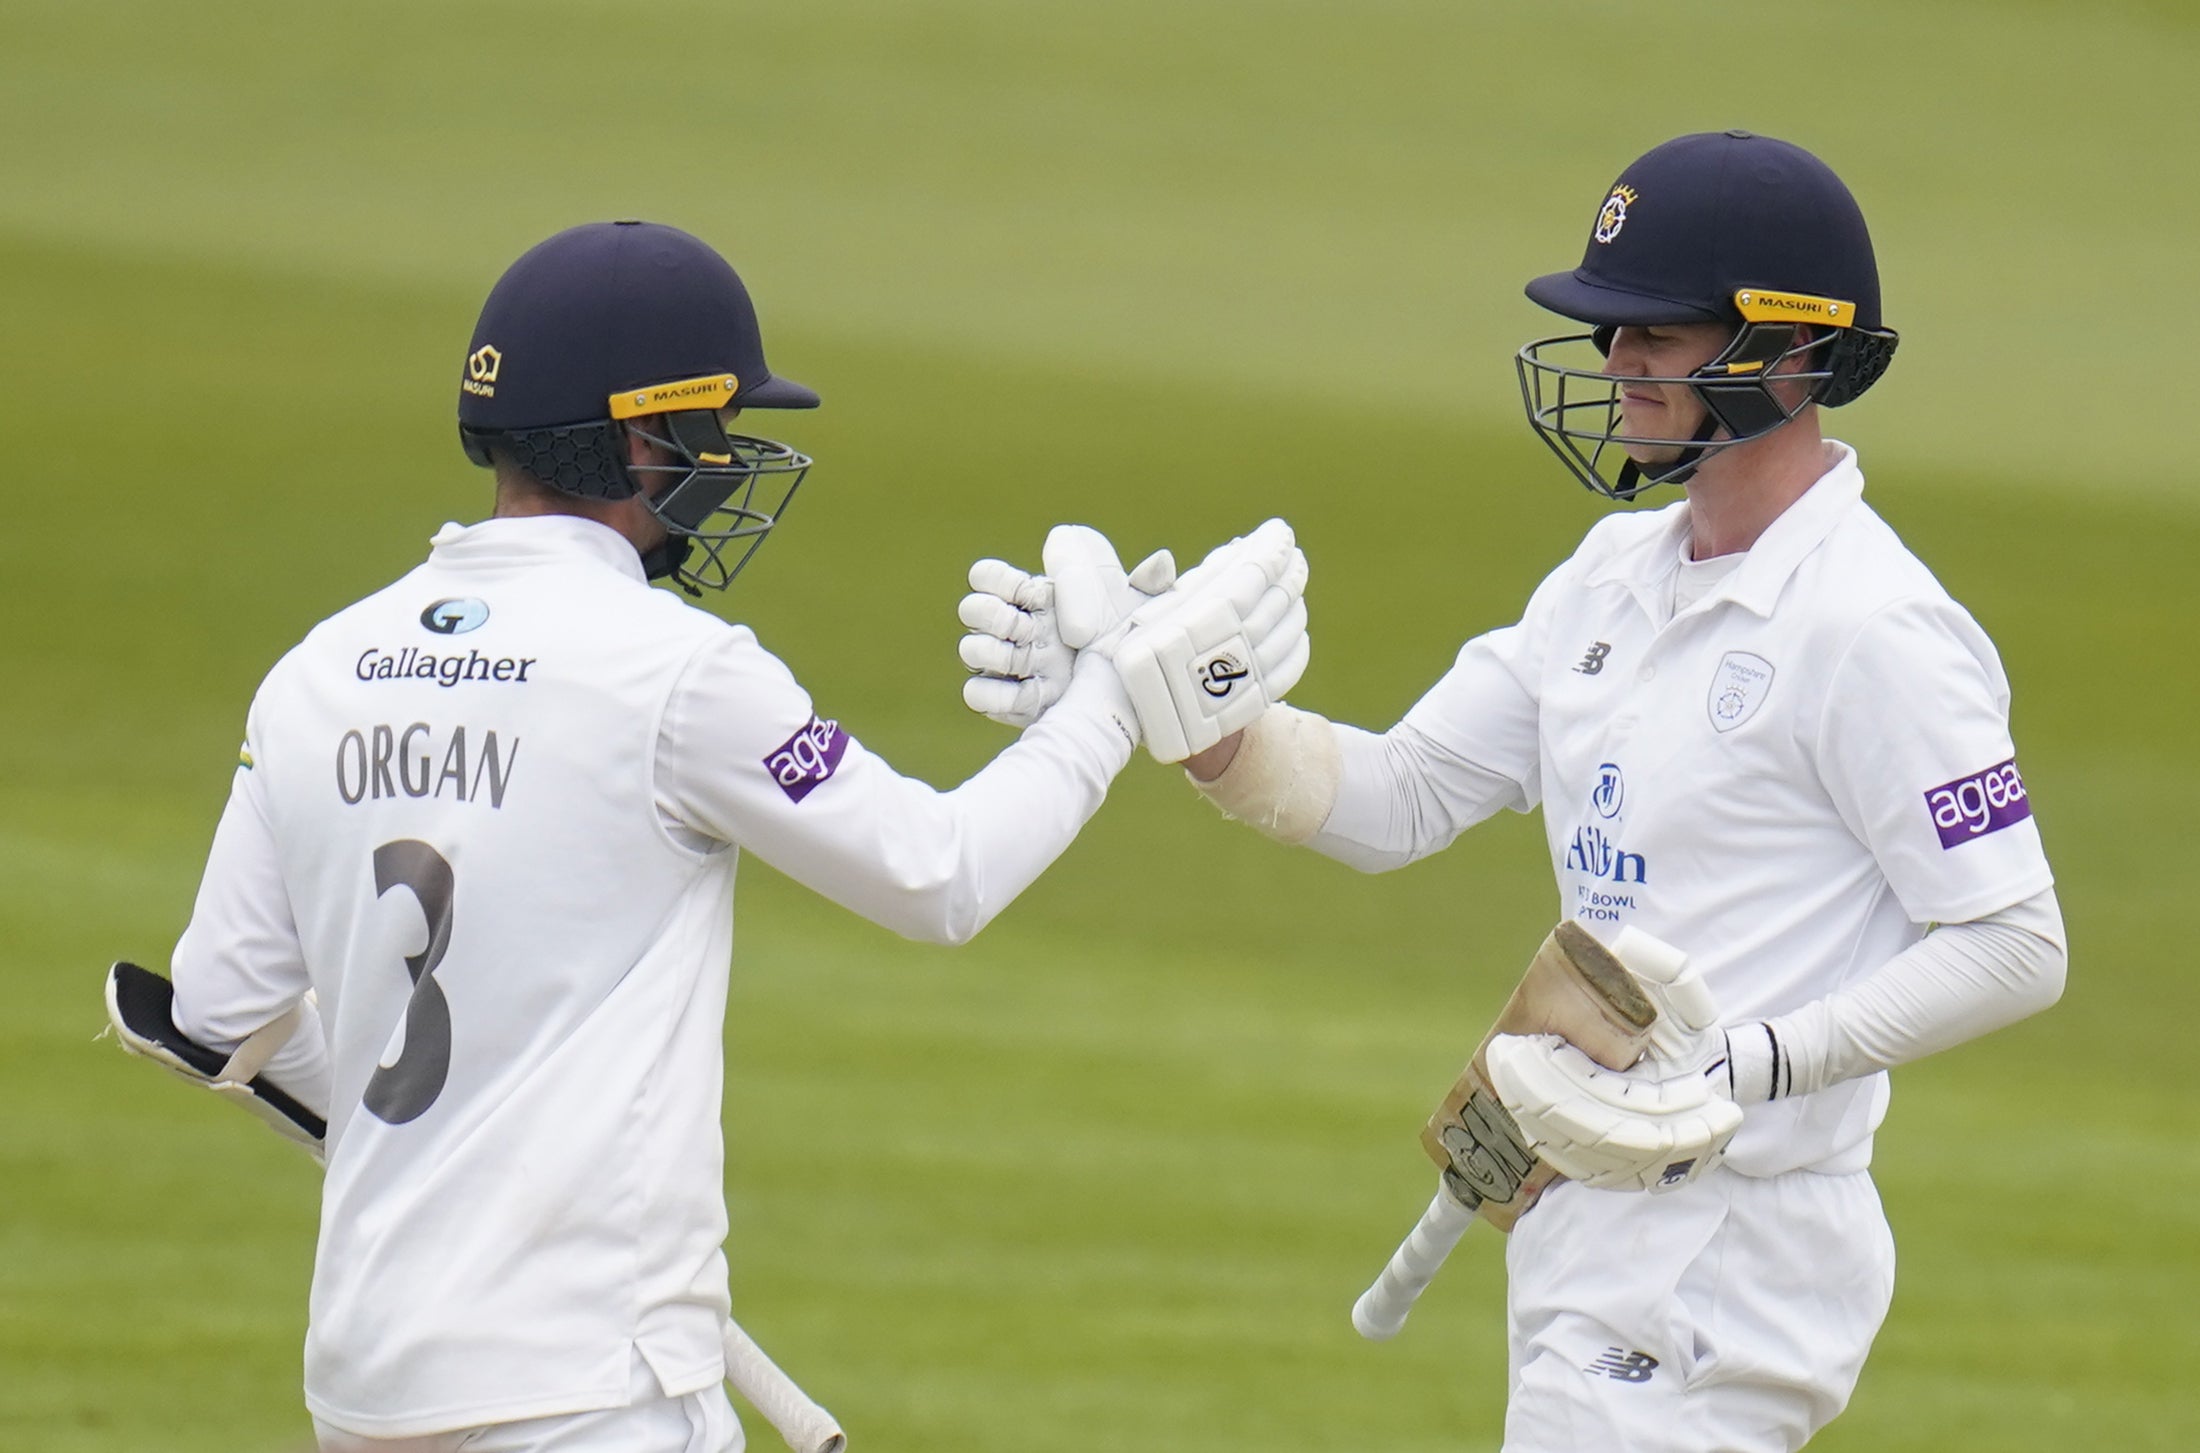 Hampshire all-rounder Felix Organ impressed with the bat against Gloucestershire (Andrew Matthews/PA)